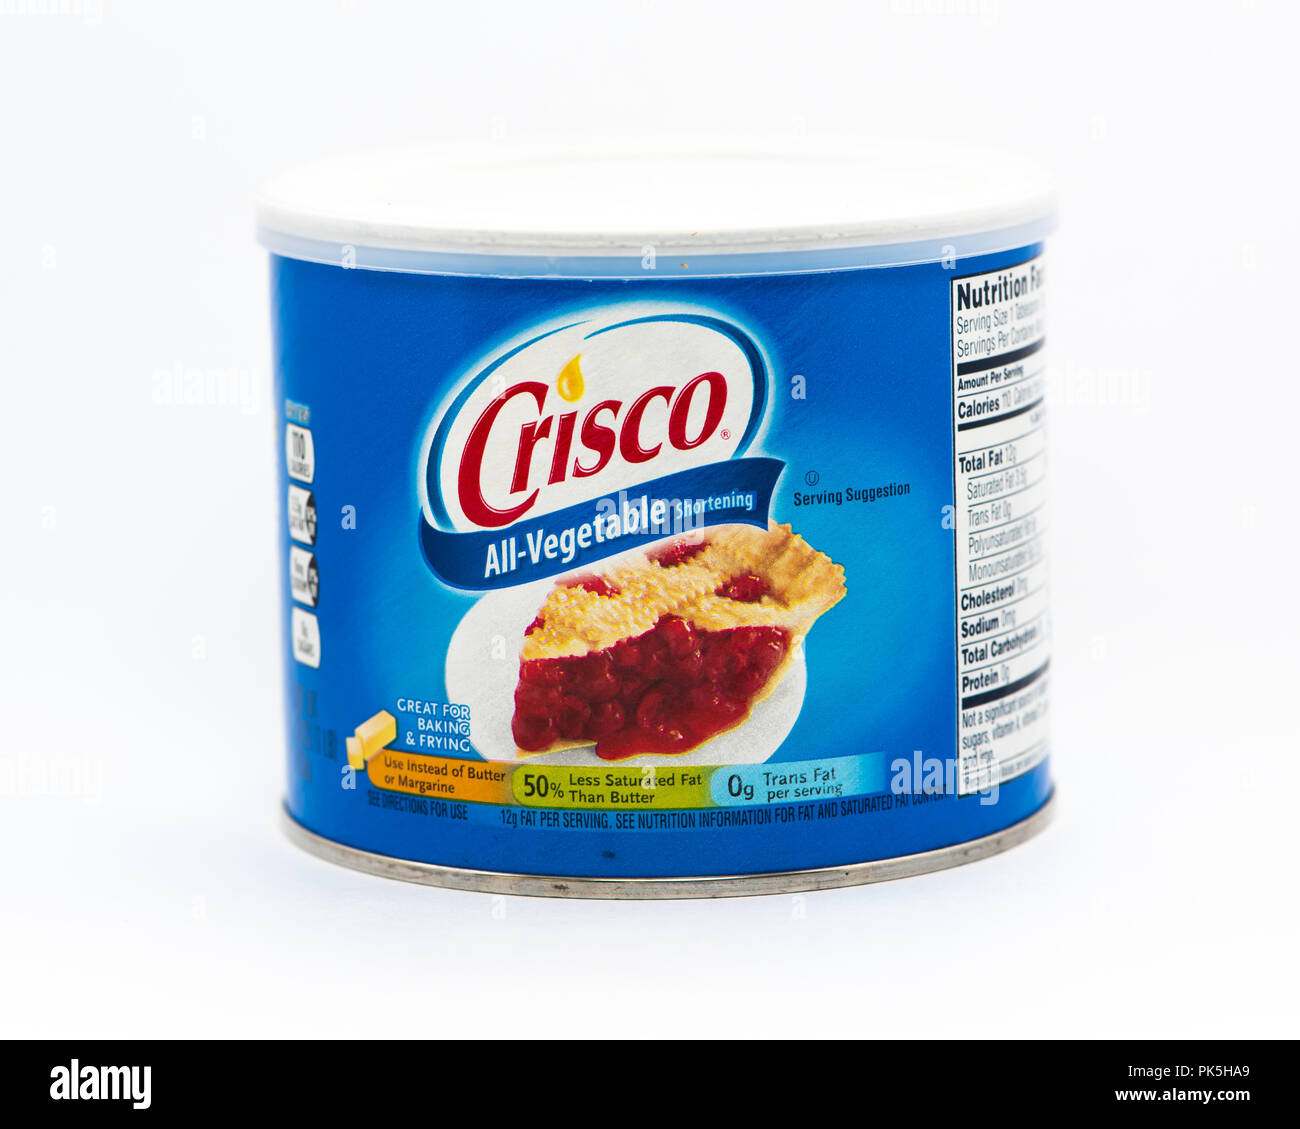 A cardboard container of Pillsbury Crisco, the All-Vegetable shortening for baking and frying food. Stock Photo